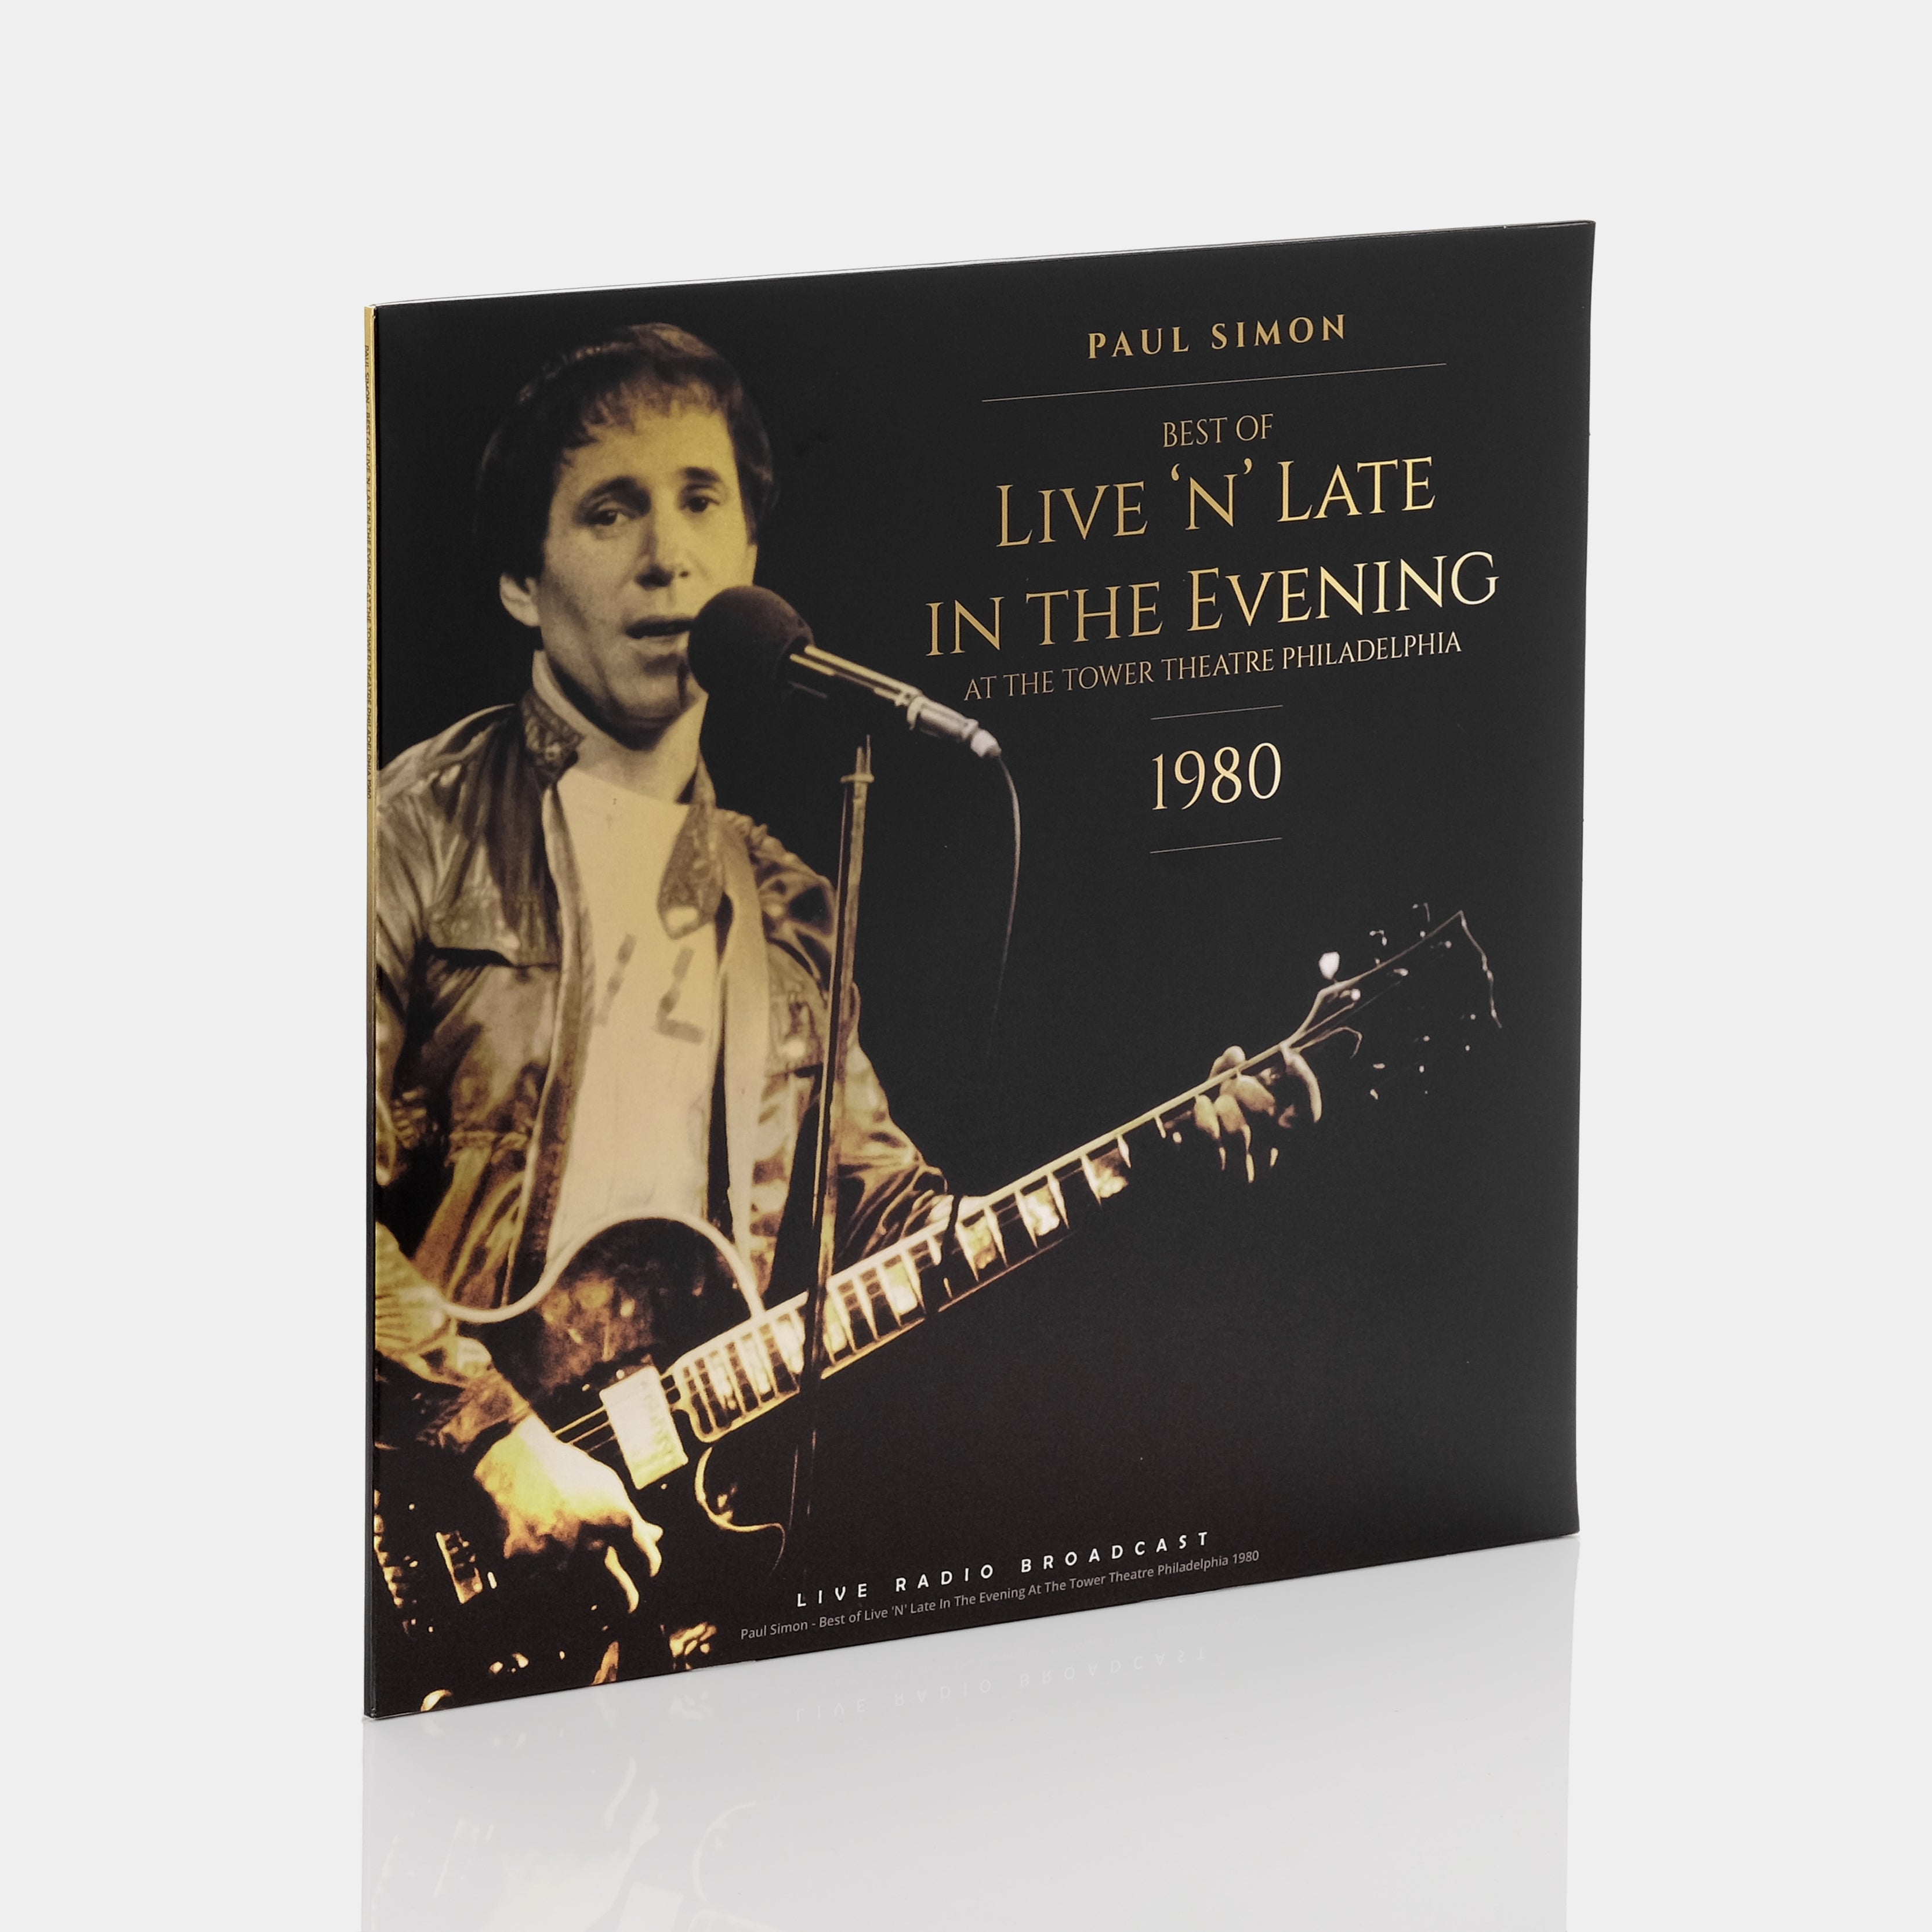 Paul Simon - Best Of Live 'N' Late In The Evening LP Vinyl Record